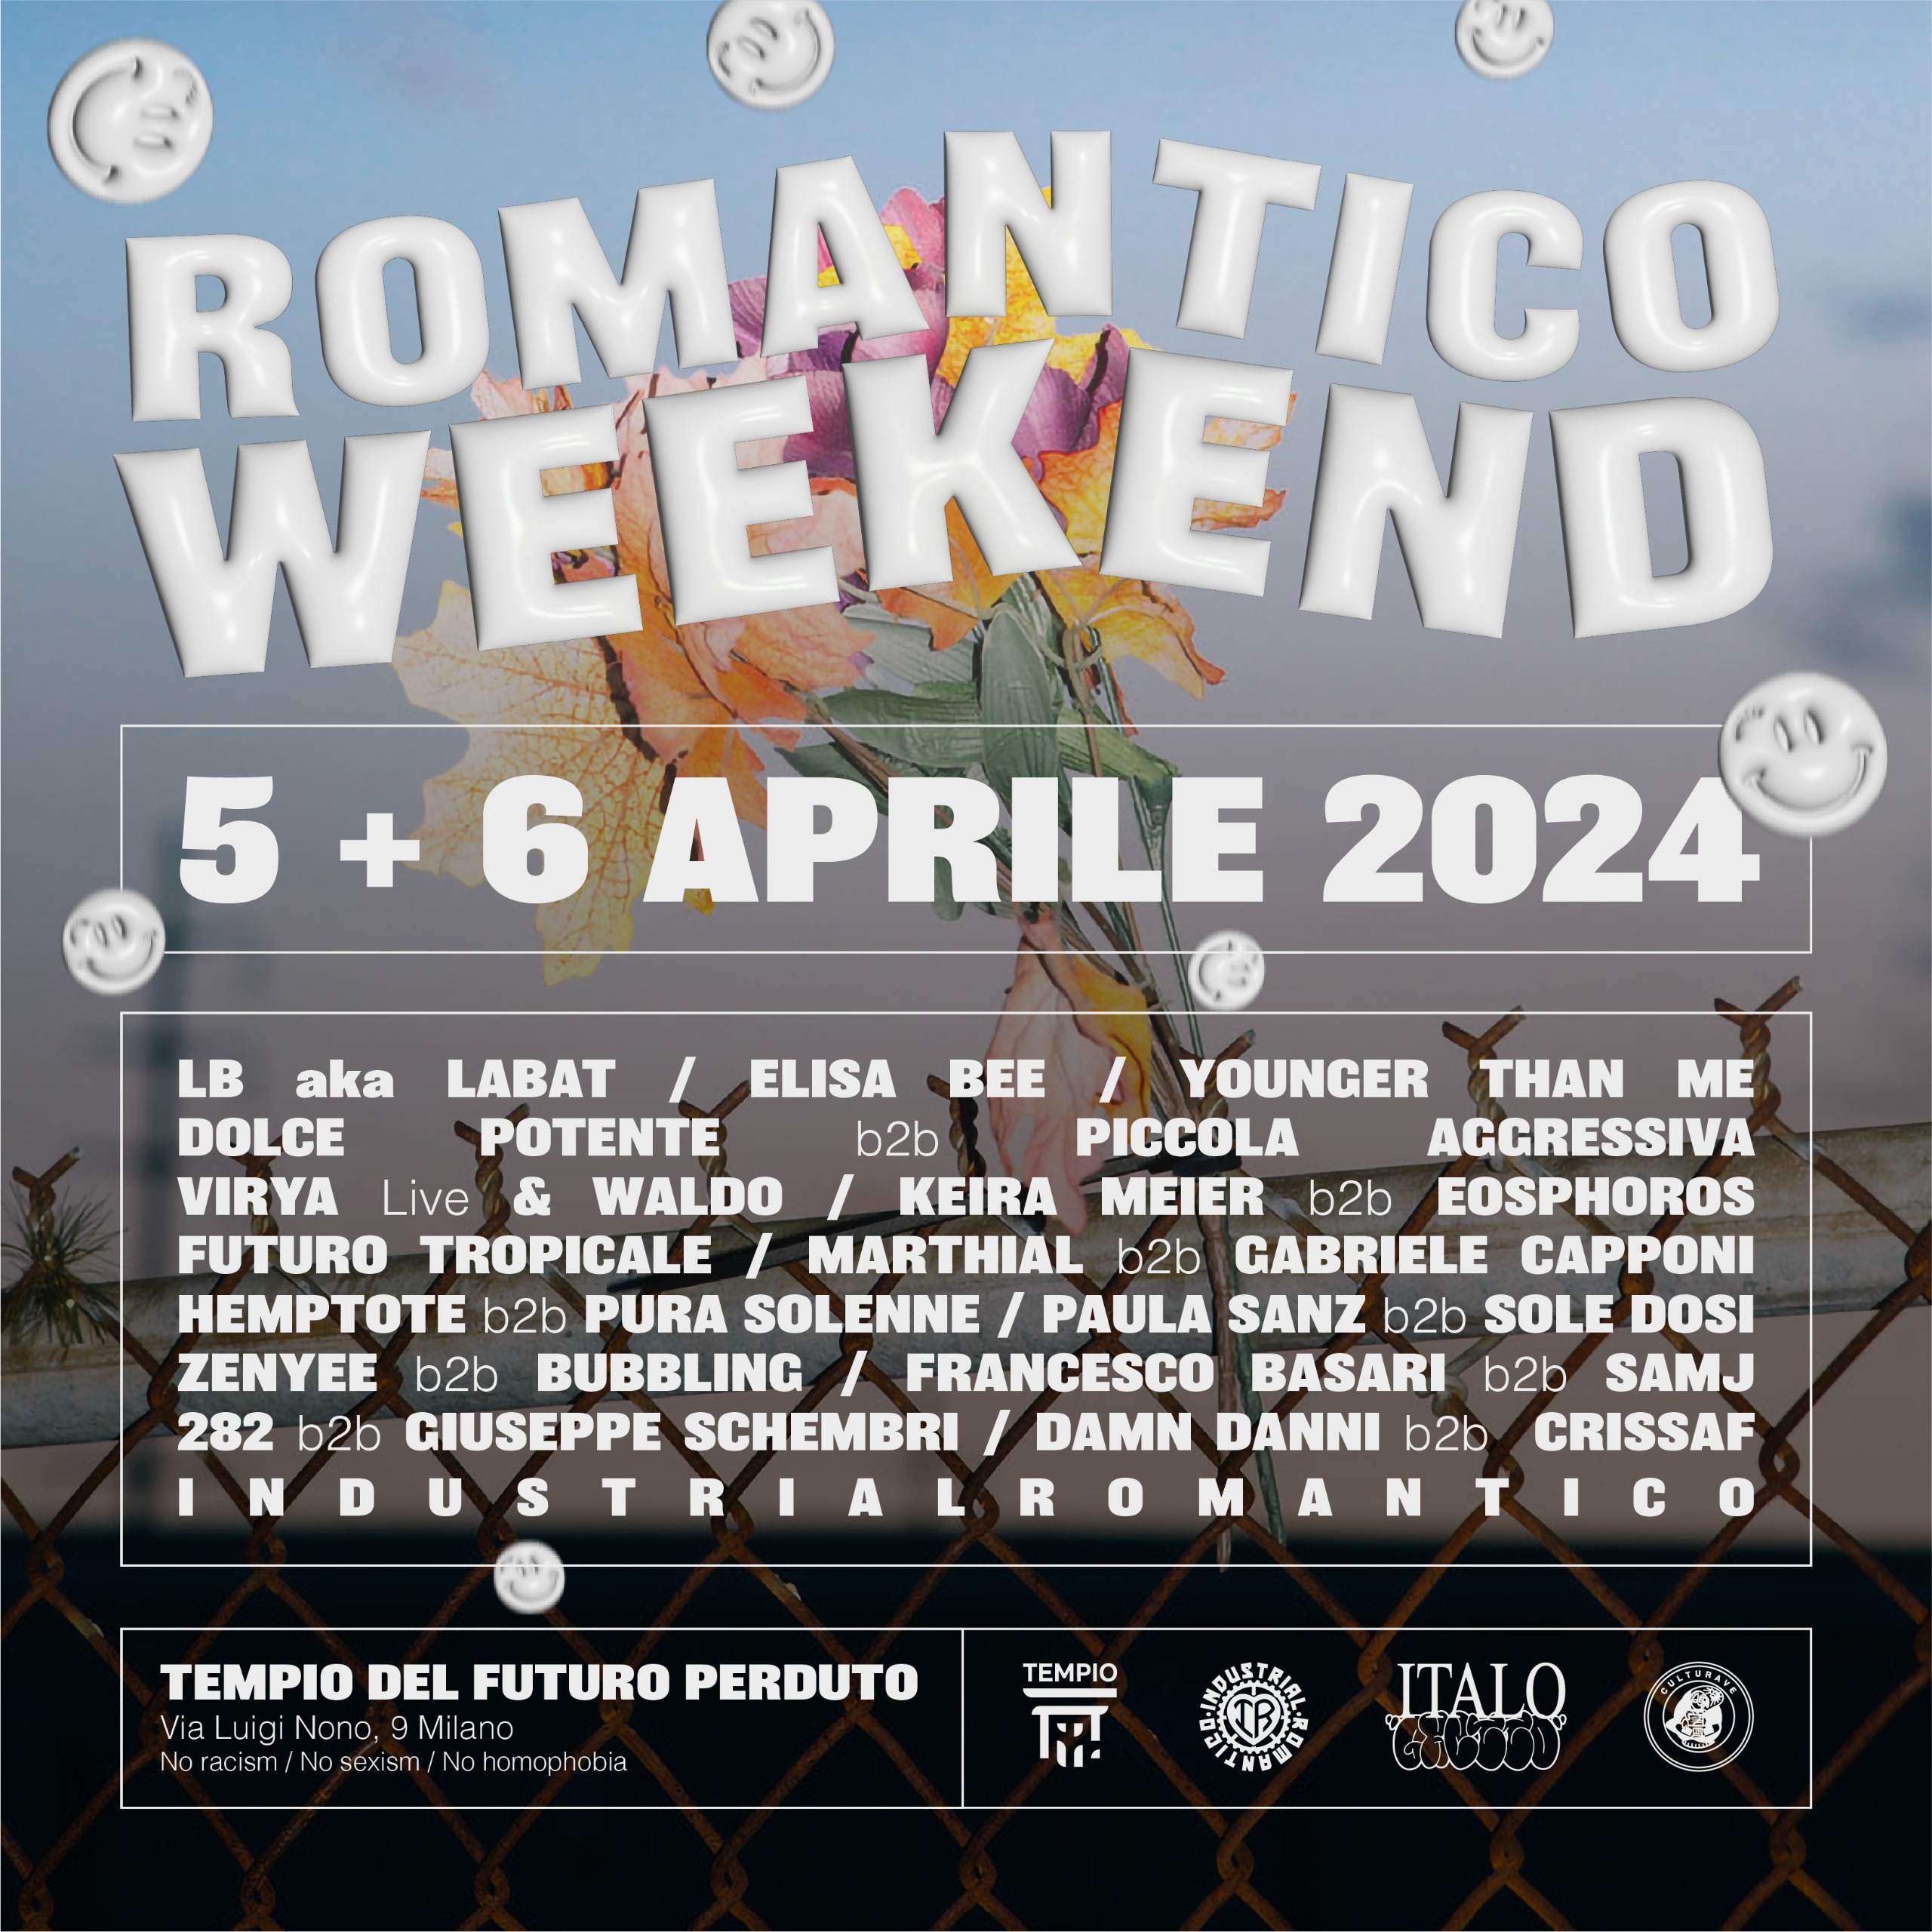 Weekend Romantico: 19 Djs, 3 Live performances and much more - Página frontal